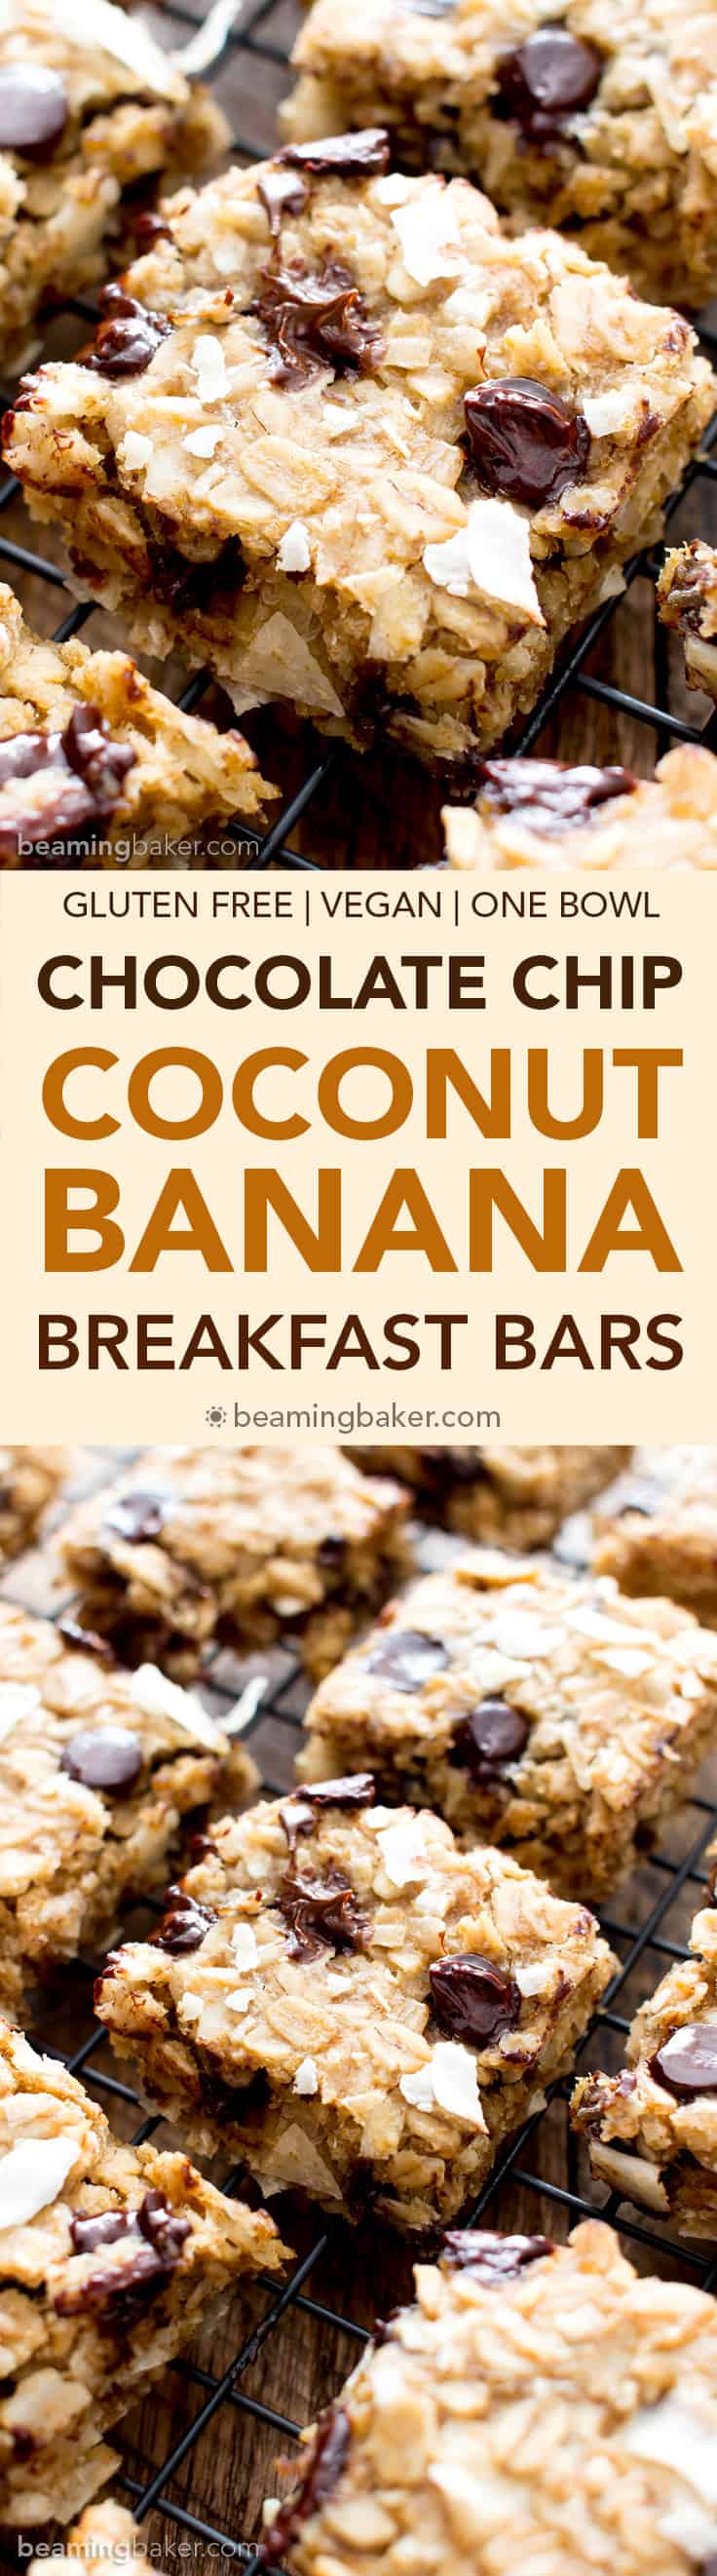 Easy Gluten Free Coconut Chocolate Chip Banana Breakfast Bars (V, GF): a quick and easy recipe for healthy homemade breakfast bars made with simple, whole ingredients. #Vegan #GlutenFree #DairyFree #Healthy #Breakfast | Recipe on BeamingBaker.com 